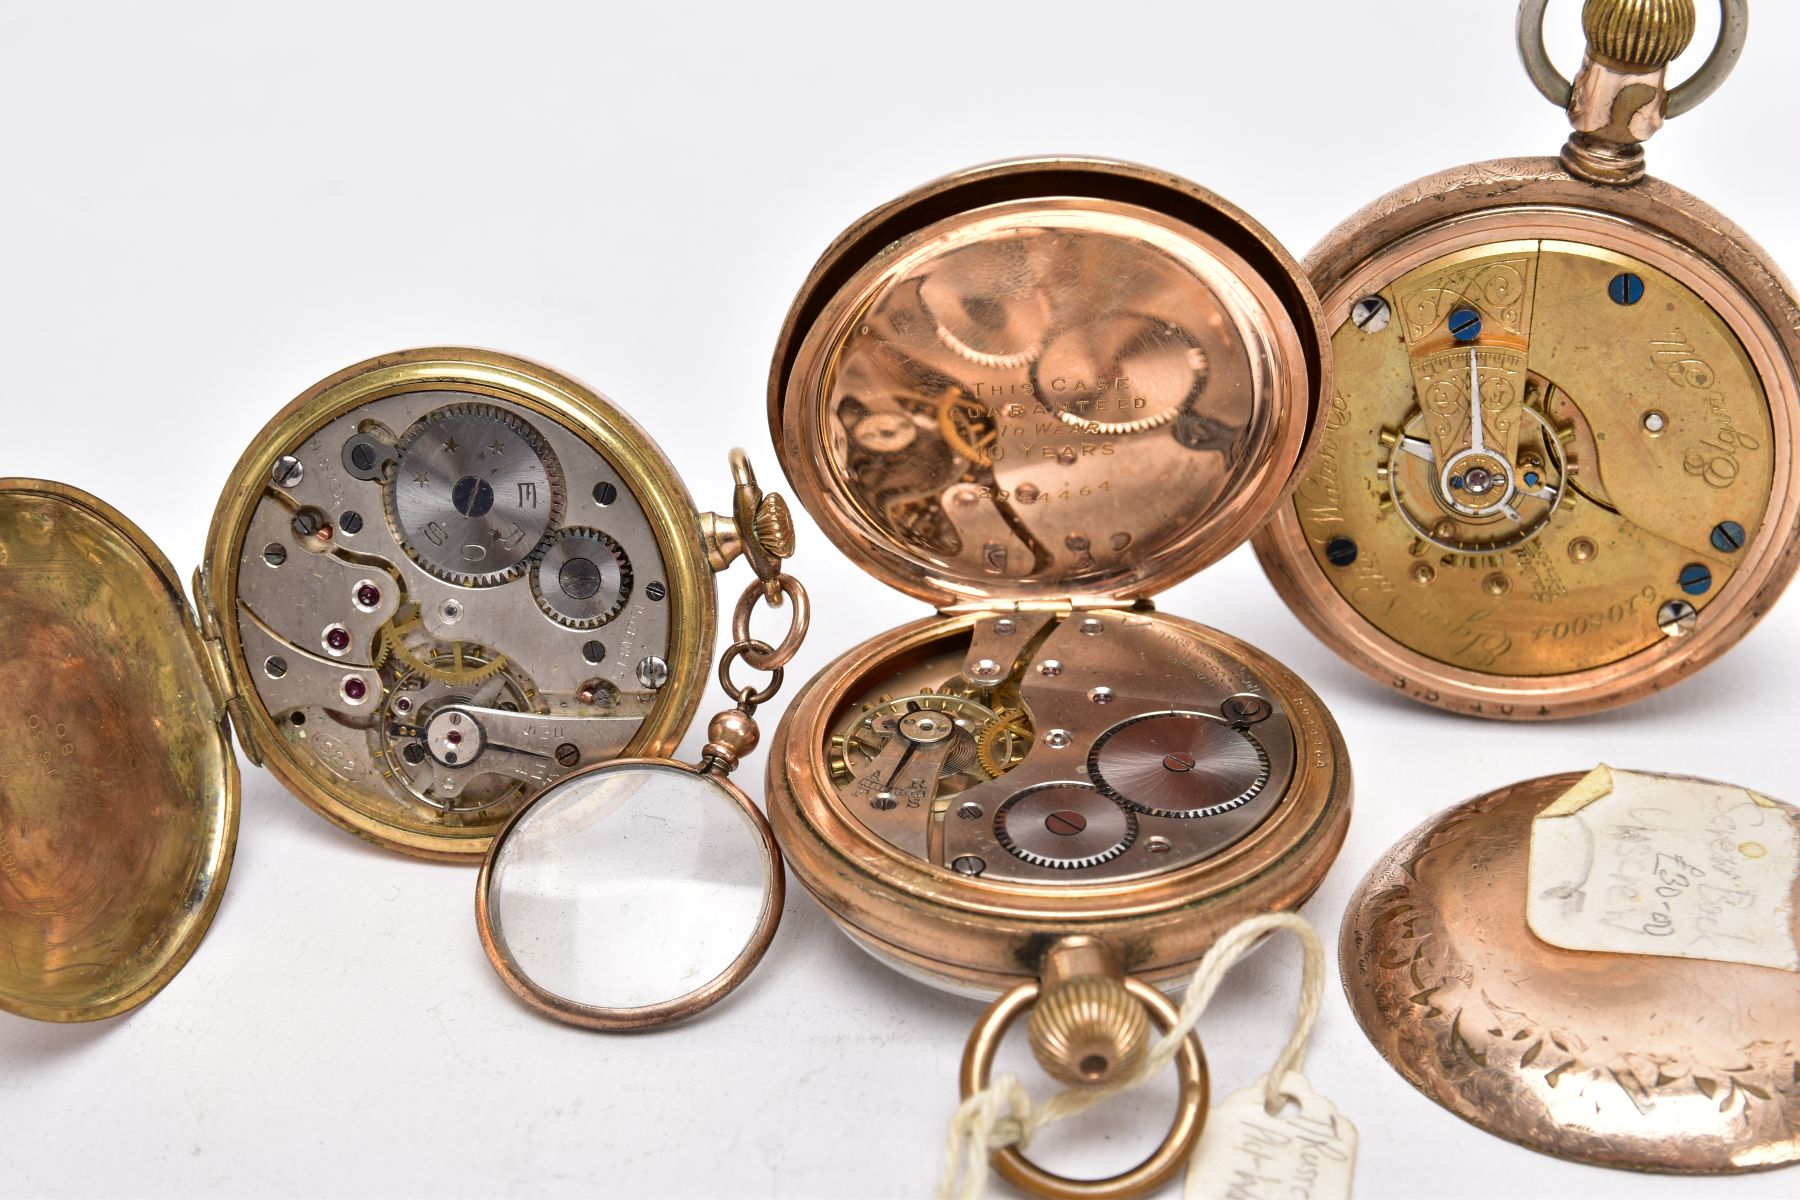 THREE GOLD PLATED OPEN FACED POCKET WATCHES, the first with a white dial signed 'Eros', Arabic - Image 8 of 8